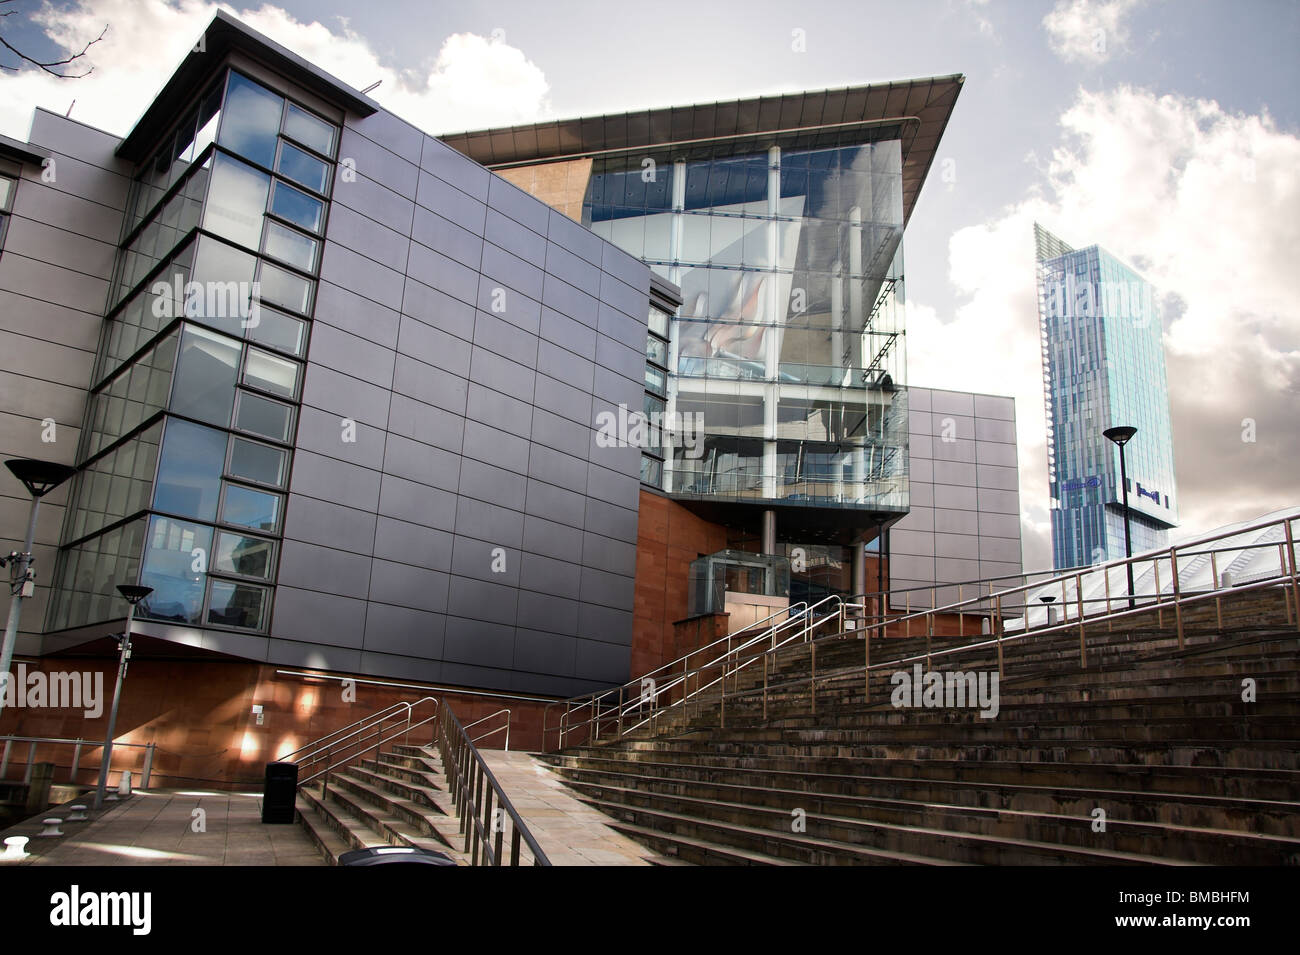 The Bridgewater Hall, Barbirolli Square, with the Hilton Hotel, Beetham Tower in the background, Manchester, UK Stock Photo